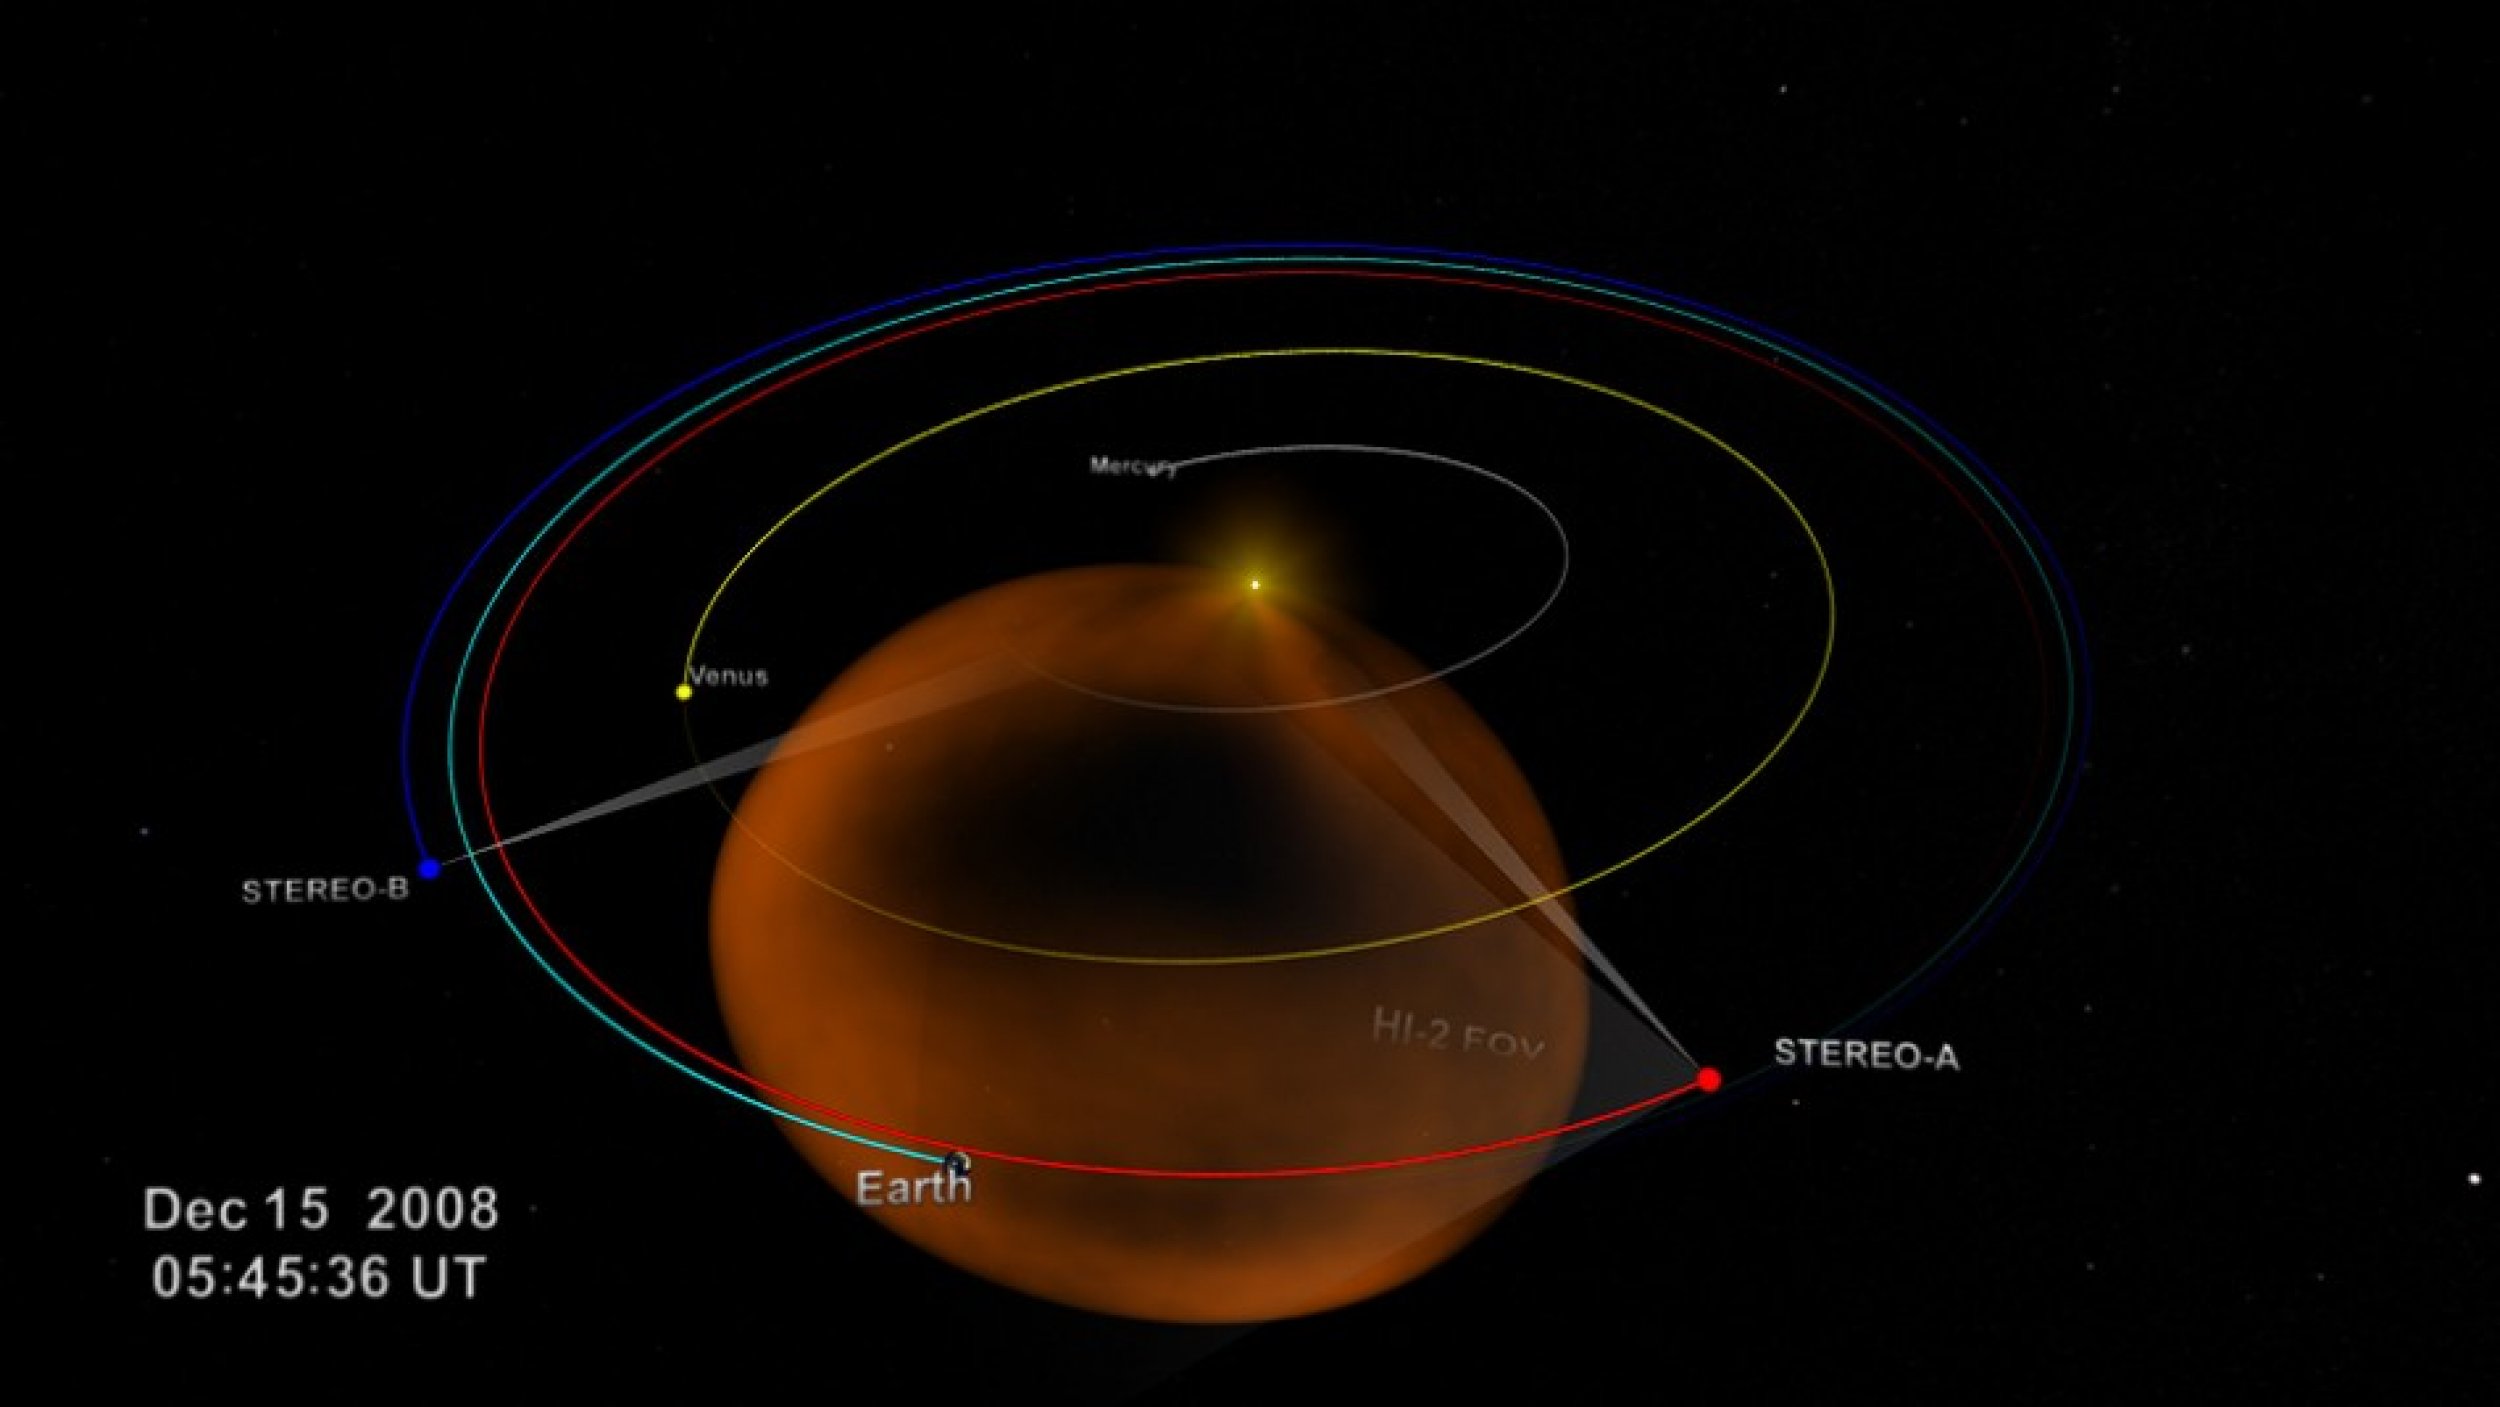 Still from video of the orbital positions and fields of view of the STEREO spacecraft during the December 2008 CME. The orange area represents the CME.